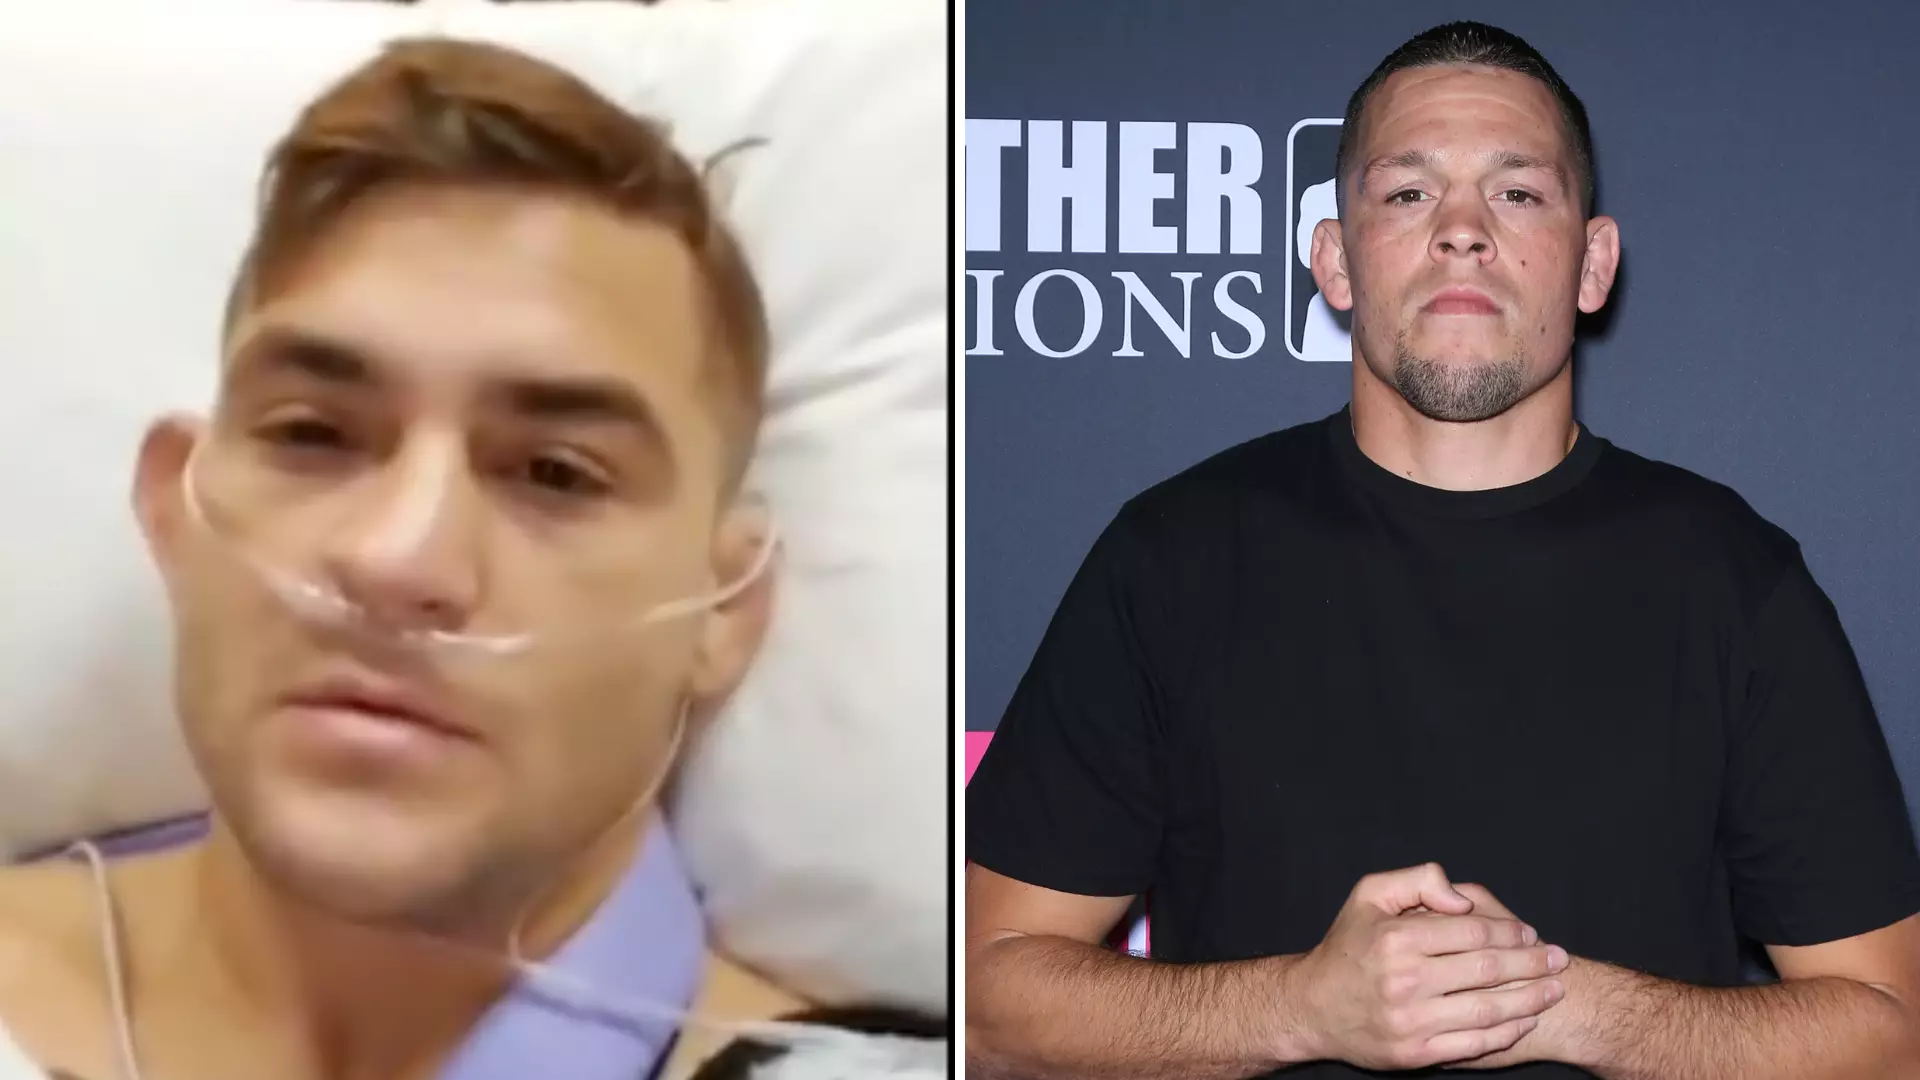 Nate Diaz Fires Back At Dustin Poirier With Savage Response Amid 'Doping' Scandal